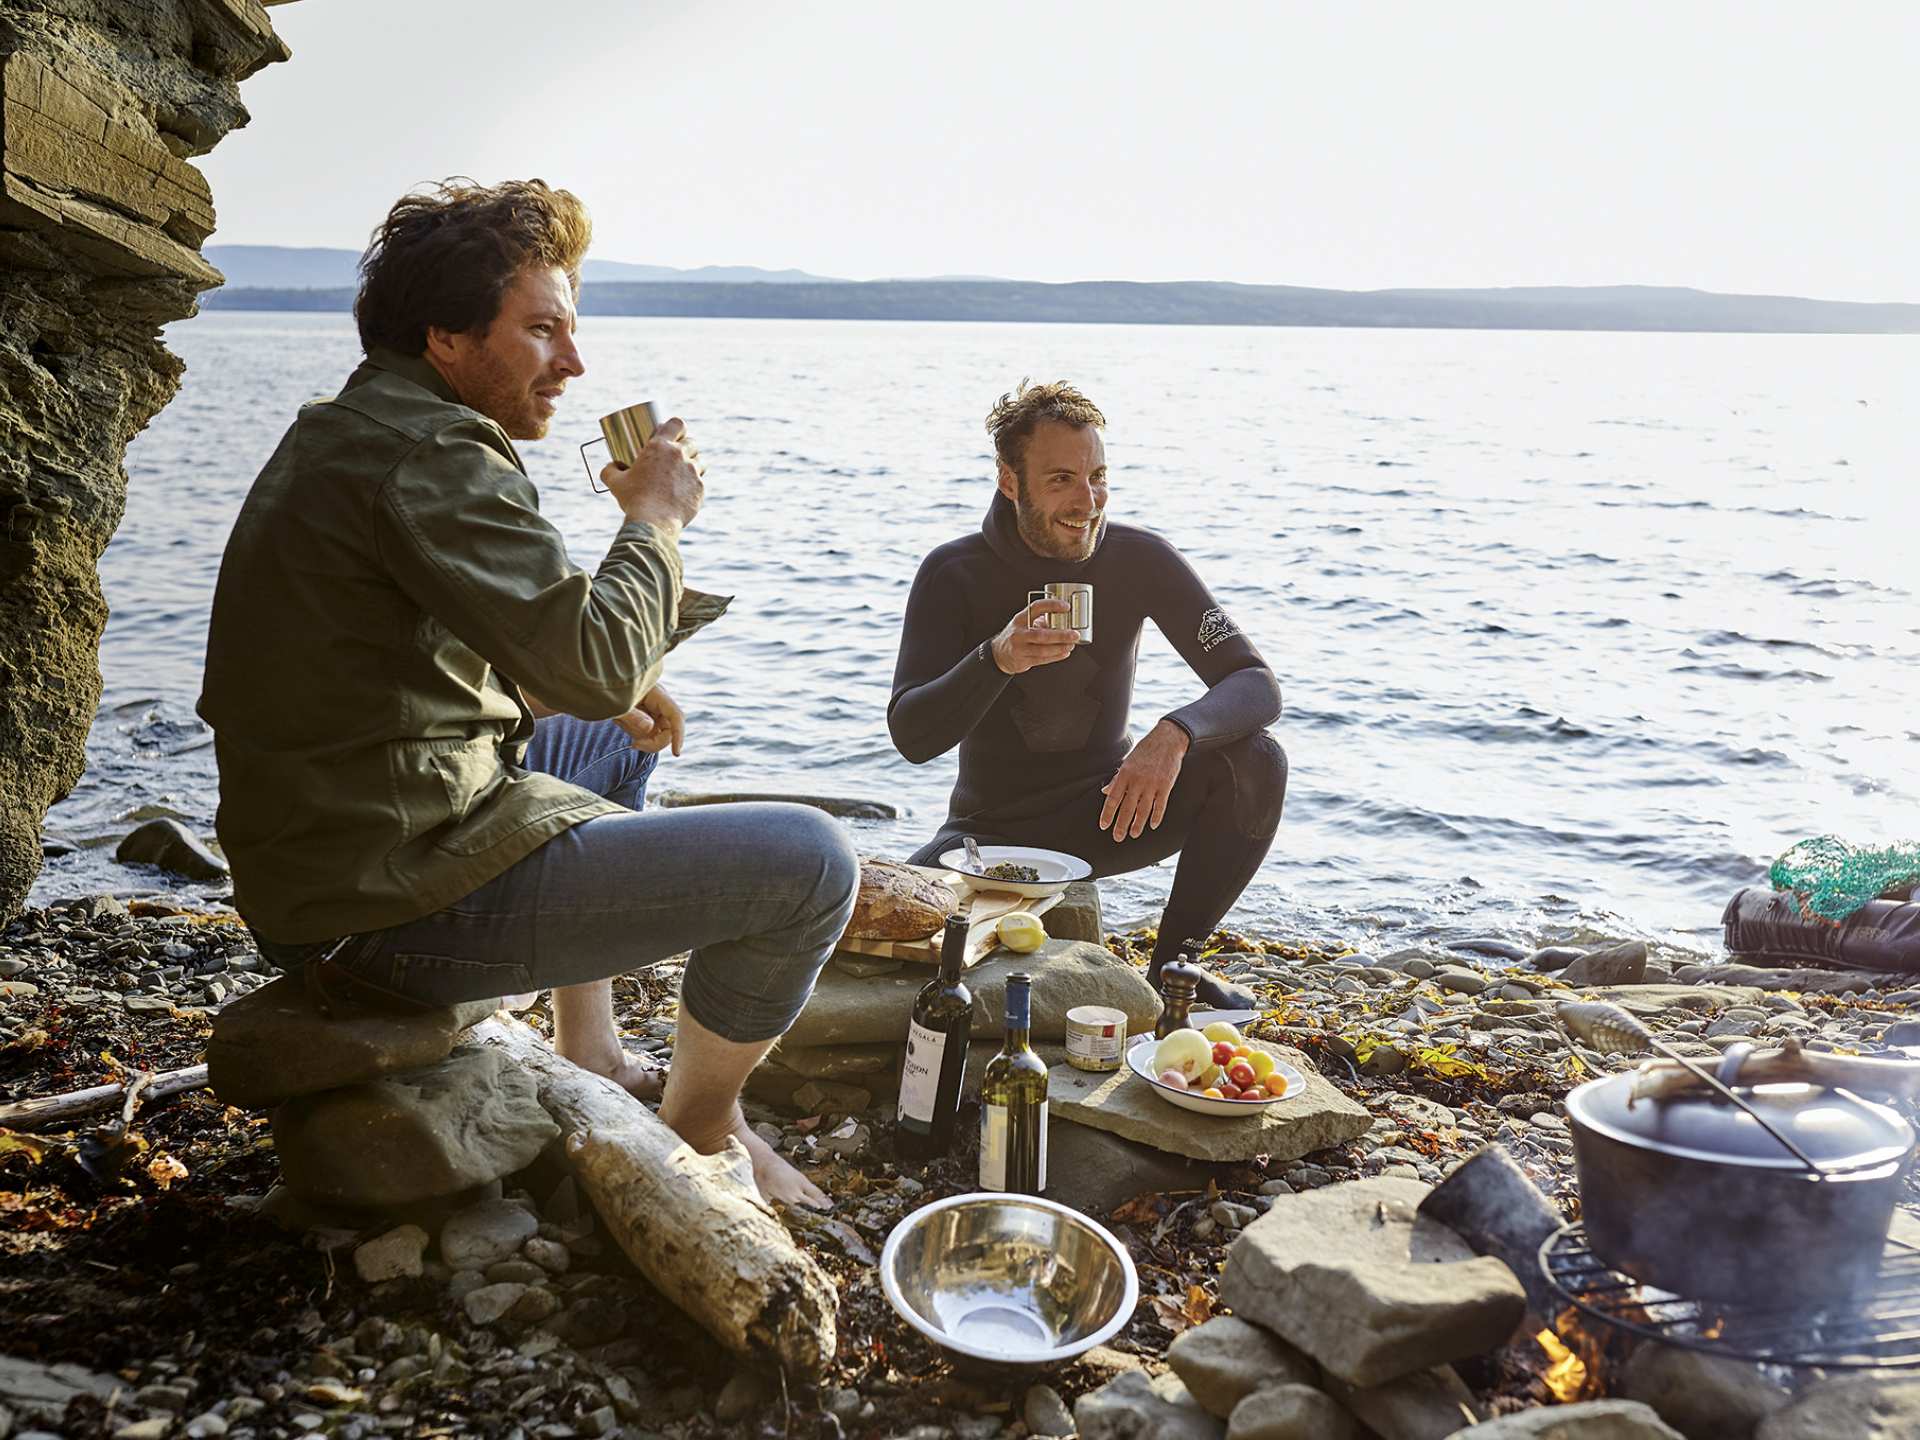 Two men enjoying a seafood boil and wine by the ocean